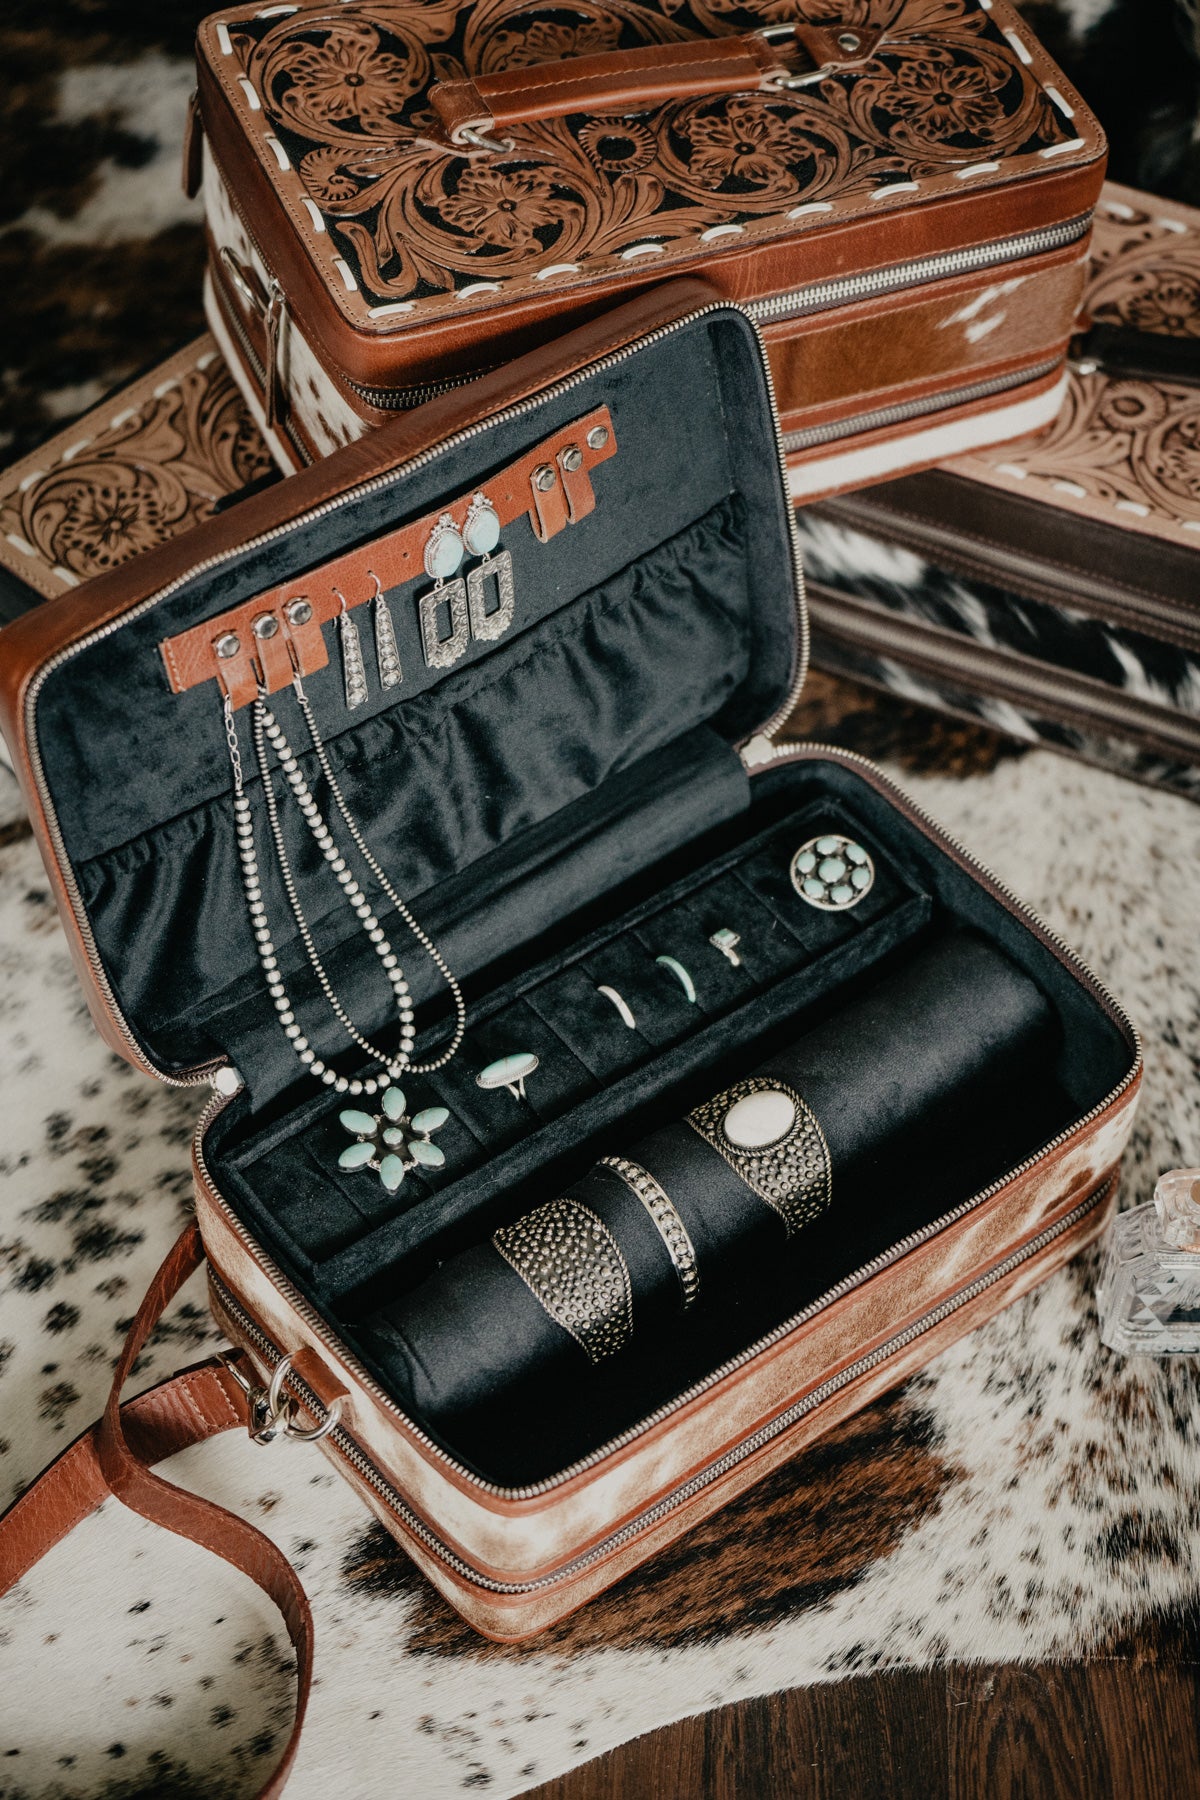 'Double Decker' Jewelry Storage and Travel Case